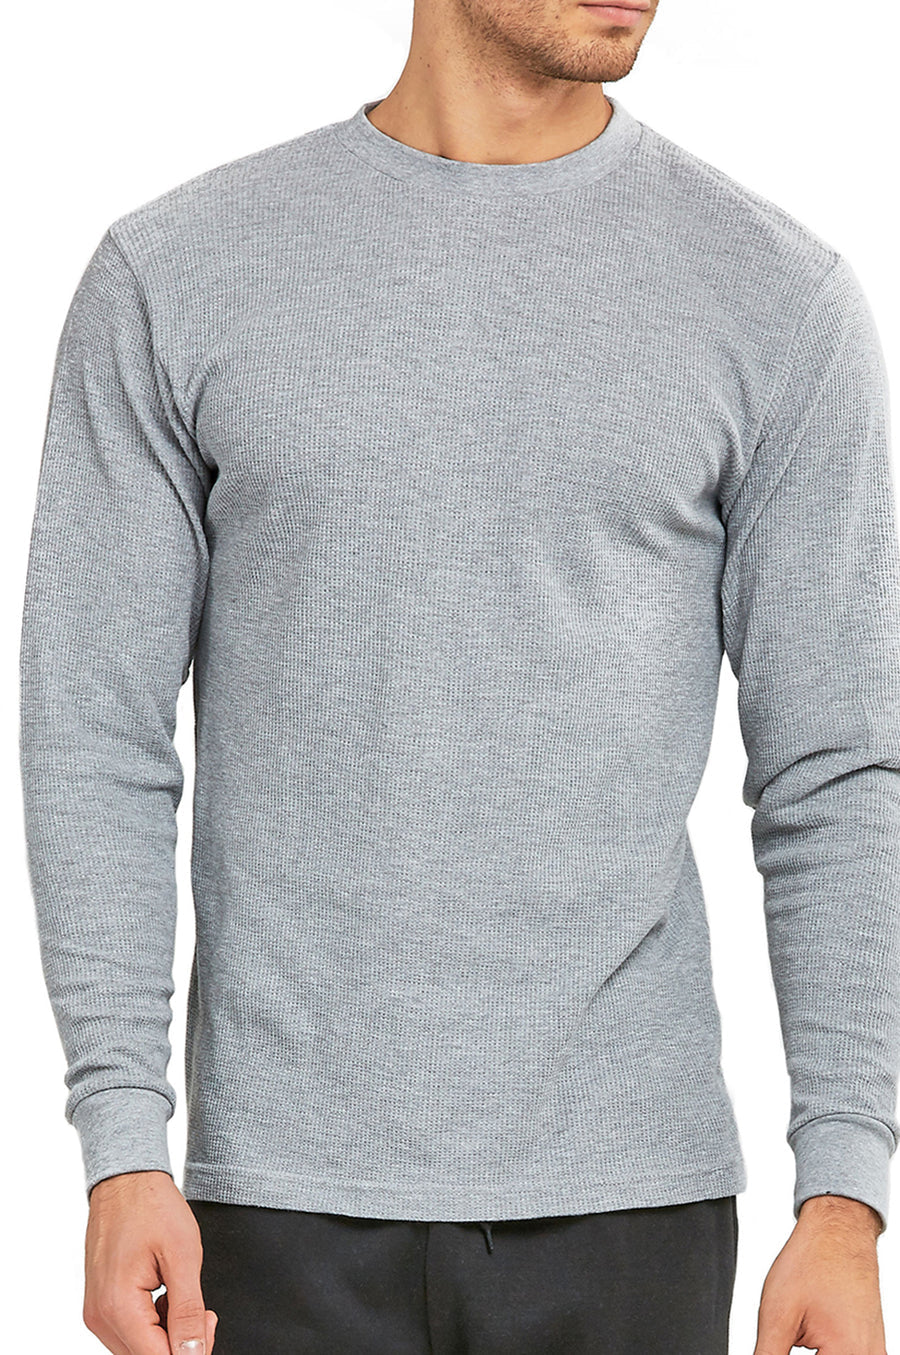 Men's Classic Waffle Knit Heavyweight Cotton Long Sleeve Thermal T-Shirt  Top - H Grey / S